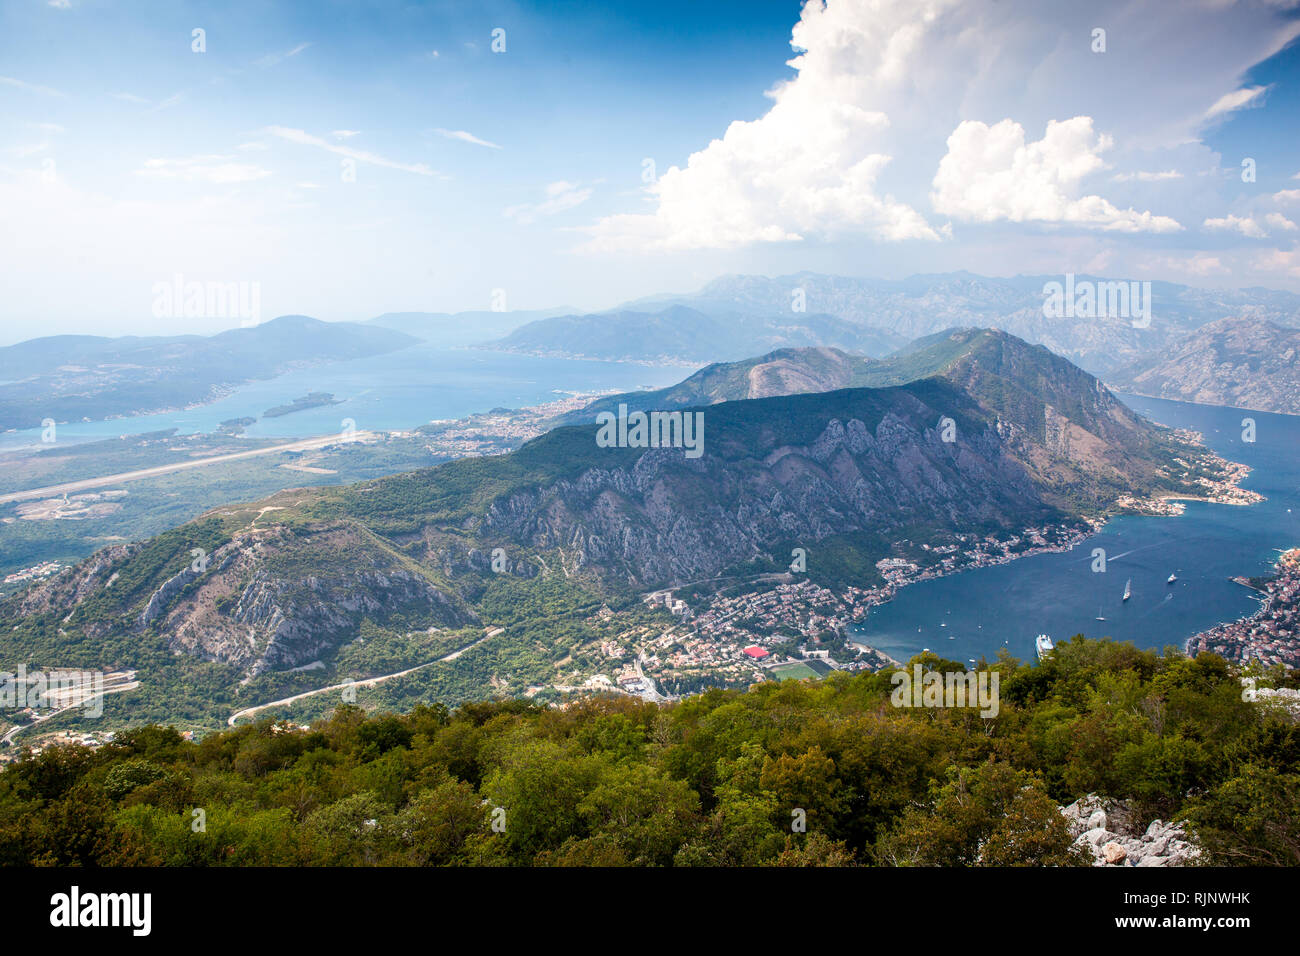 Panoramic view of the airport runway near the city, on the Adriatic Sea, from a great mountain height. Aerial view of Tivat, Kotor Bay, Montenegro. Stock Photo